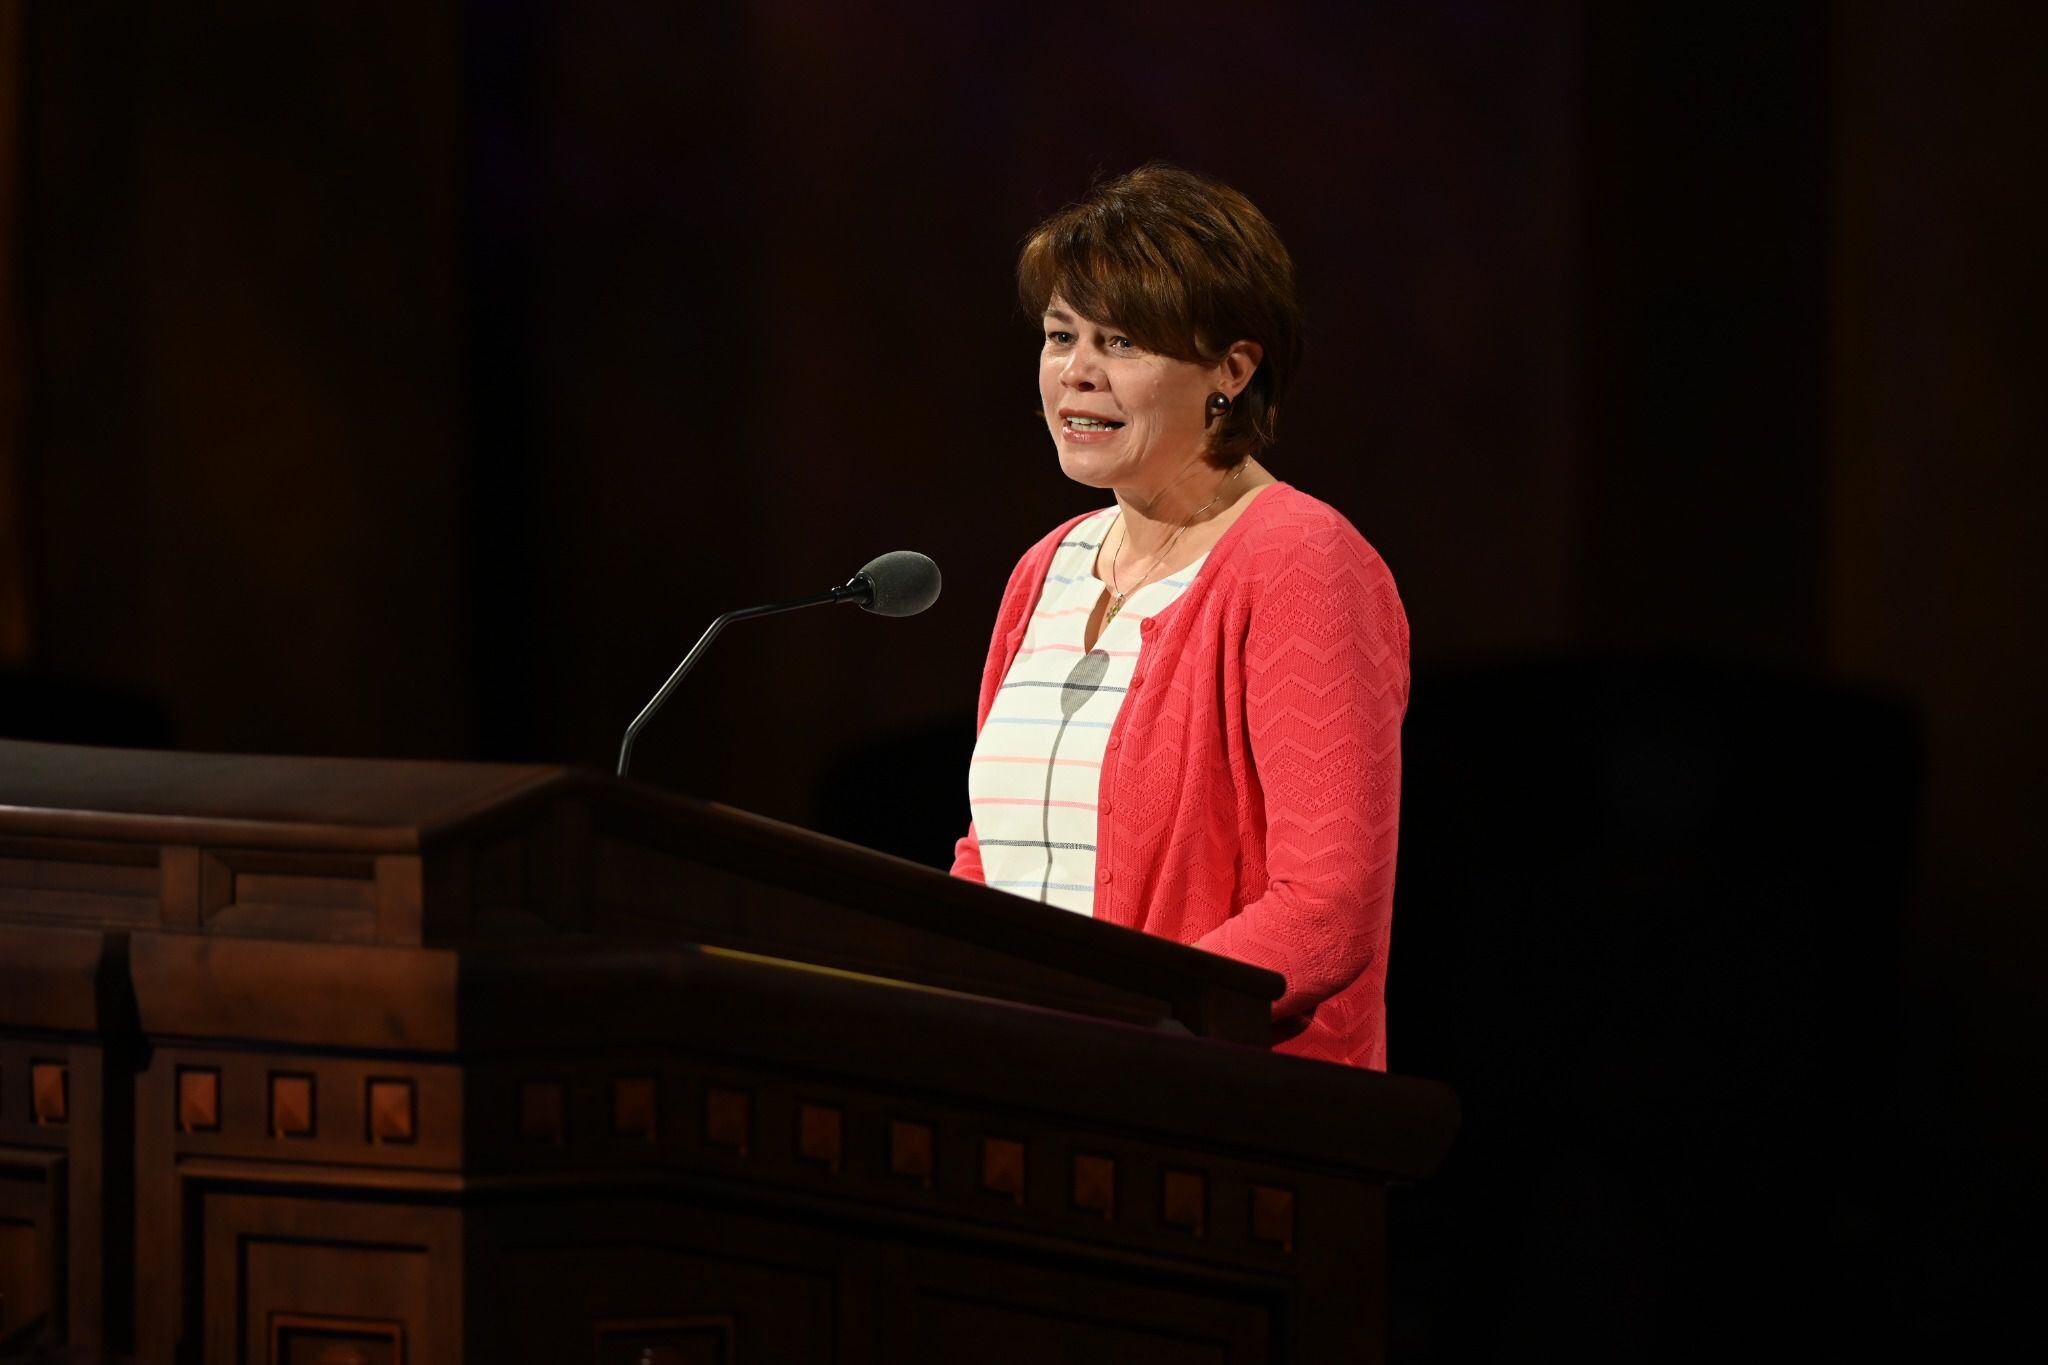 (Photo courtesy of The Church of Jesus Christ of Latter-day Saints) Sharon Eubank of the Relief Society general presidency speaks at the women's session of the October 2020 General Conference on Saturday, Oct. 3, 2020.